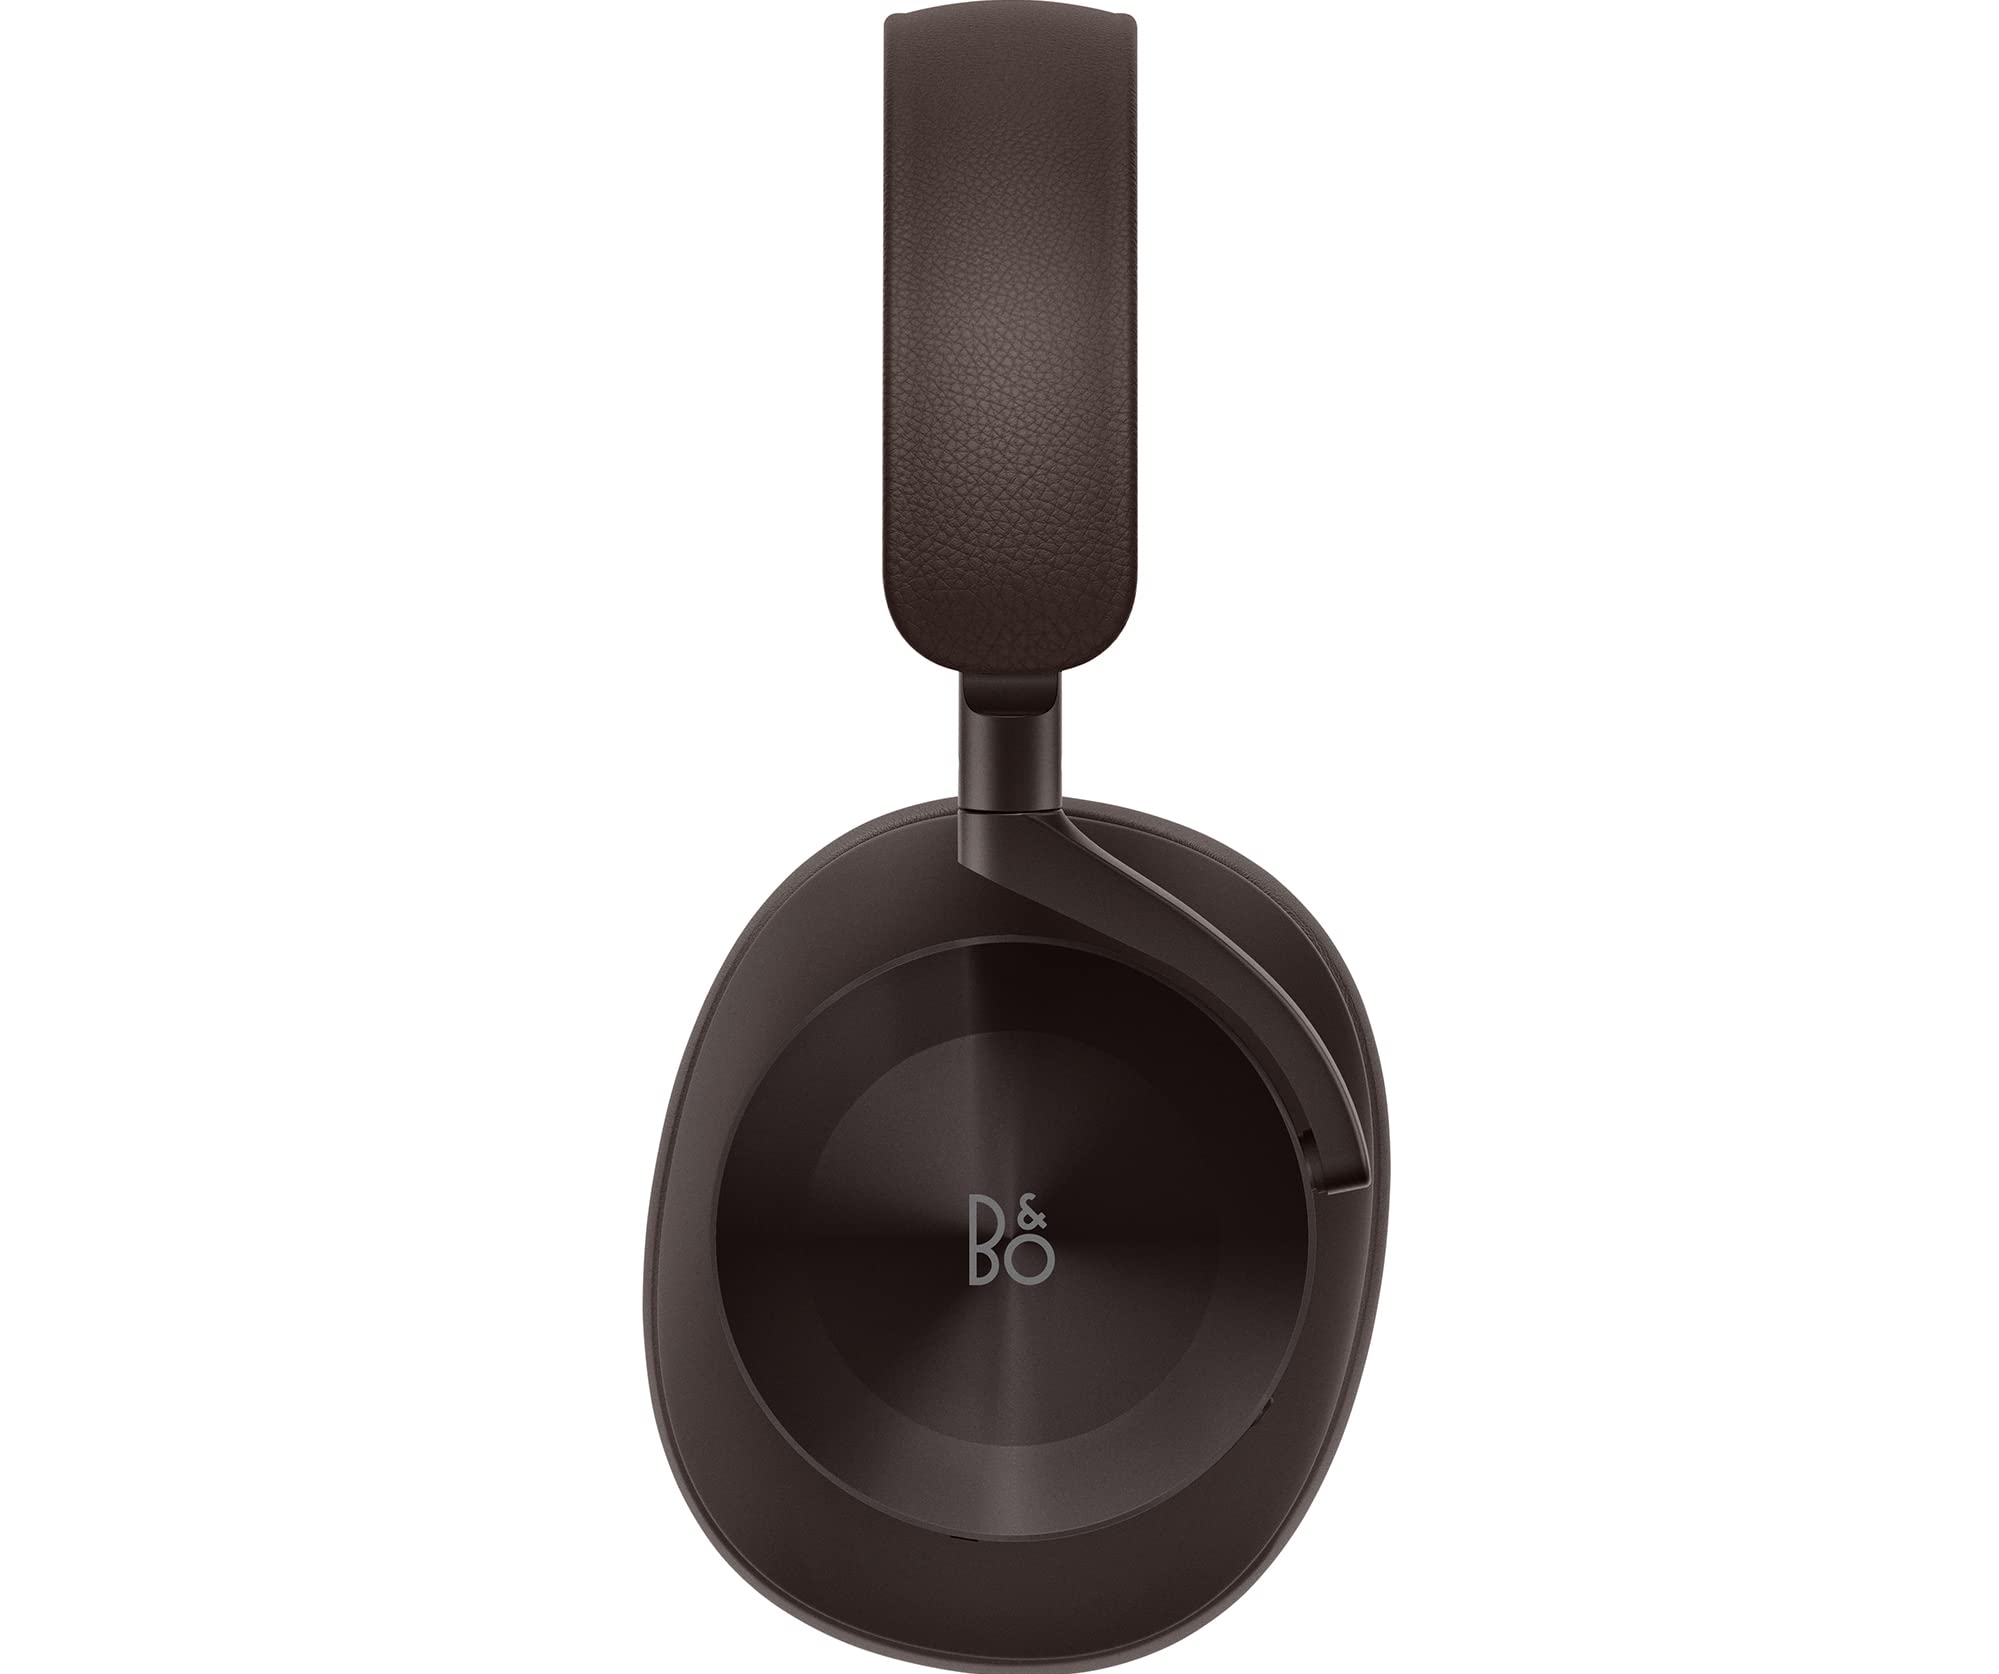 Beoplay H95 Premium Comfortable Wireless Active Noise Cancelling (ANC) Over-Ear Headphones with 38 Hours Battery Life and Protective Carrying Case, Chestnut